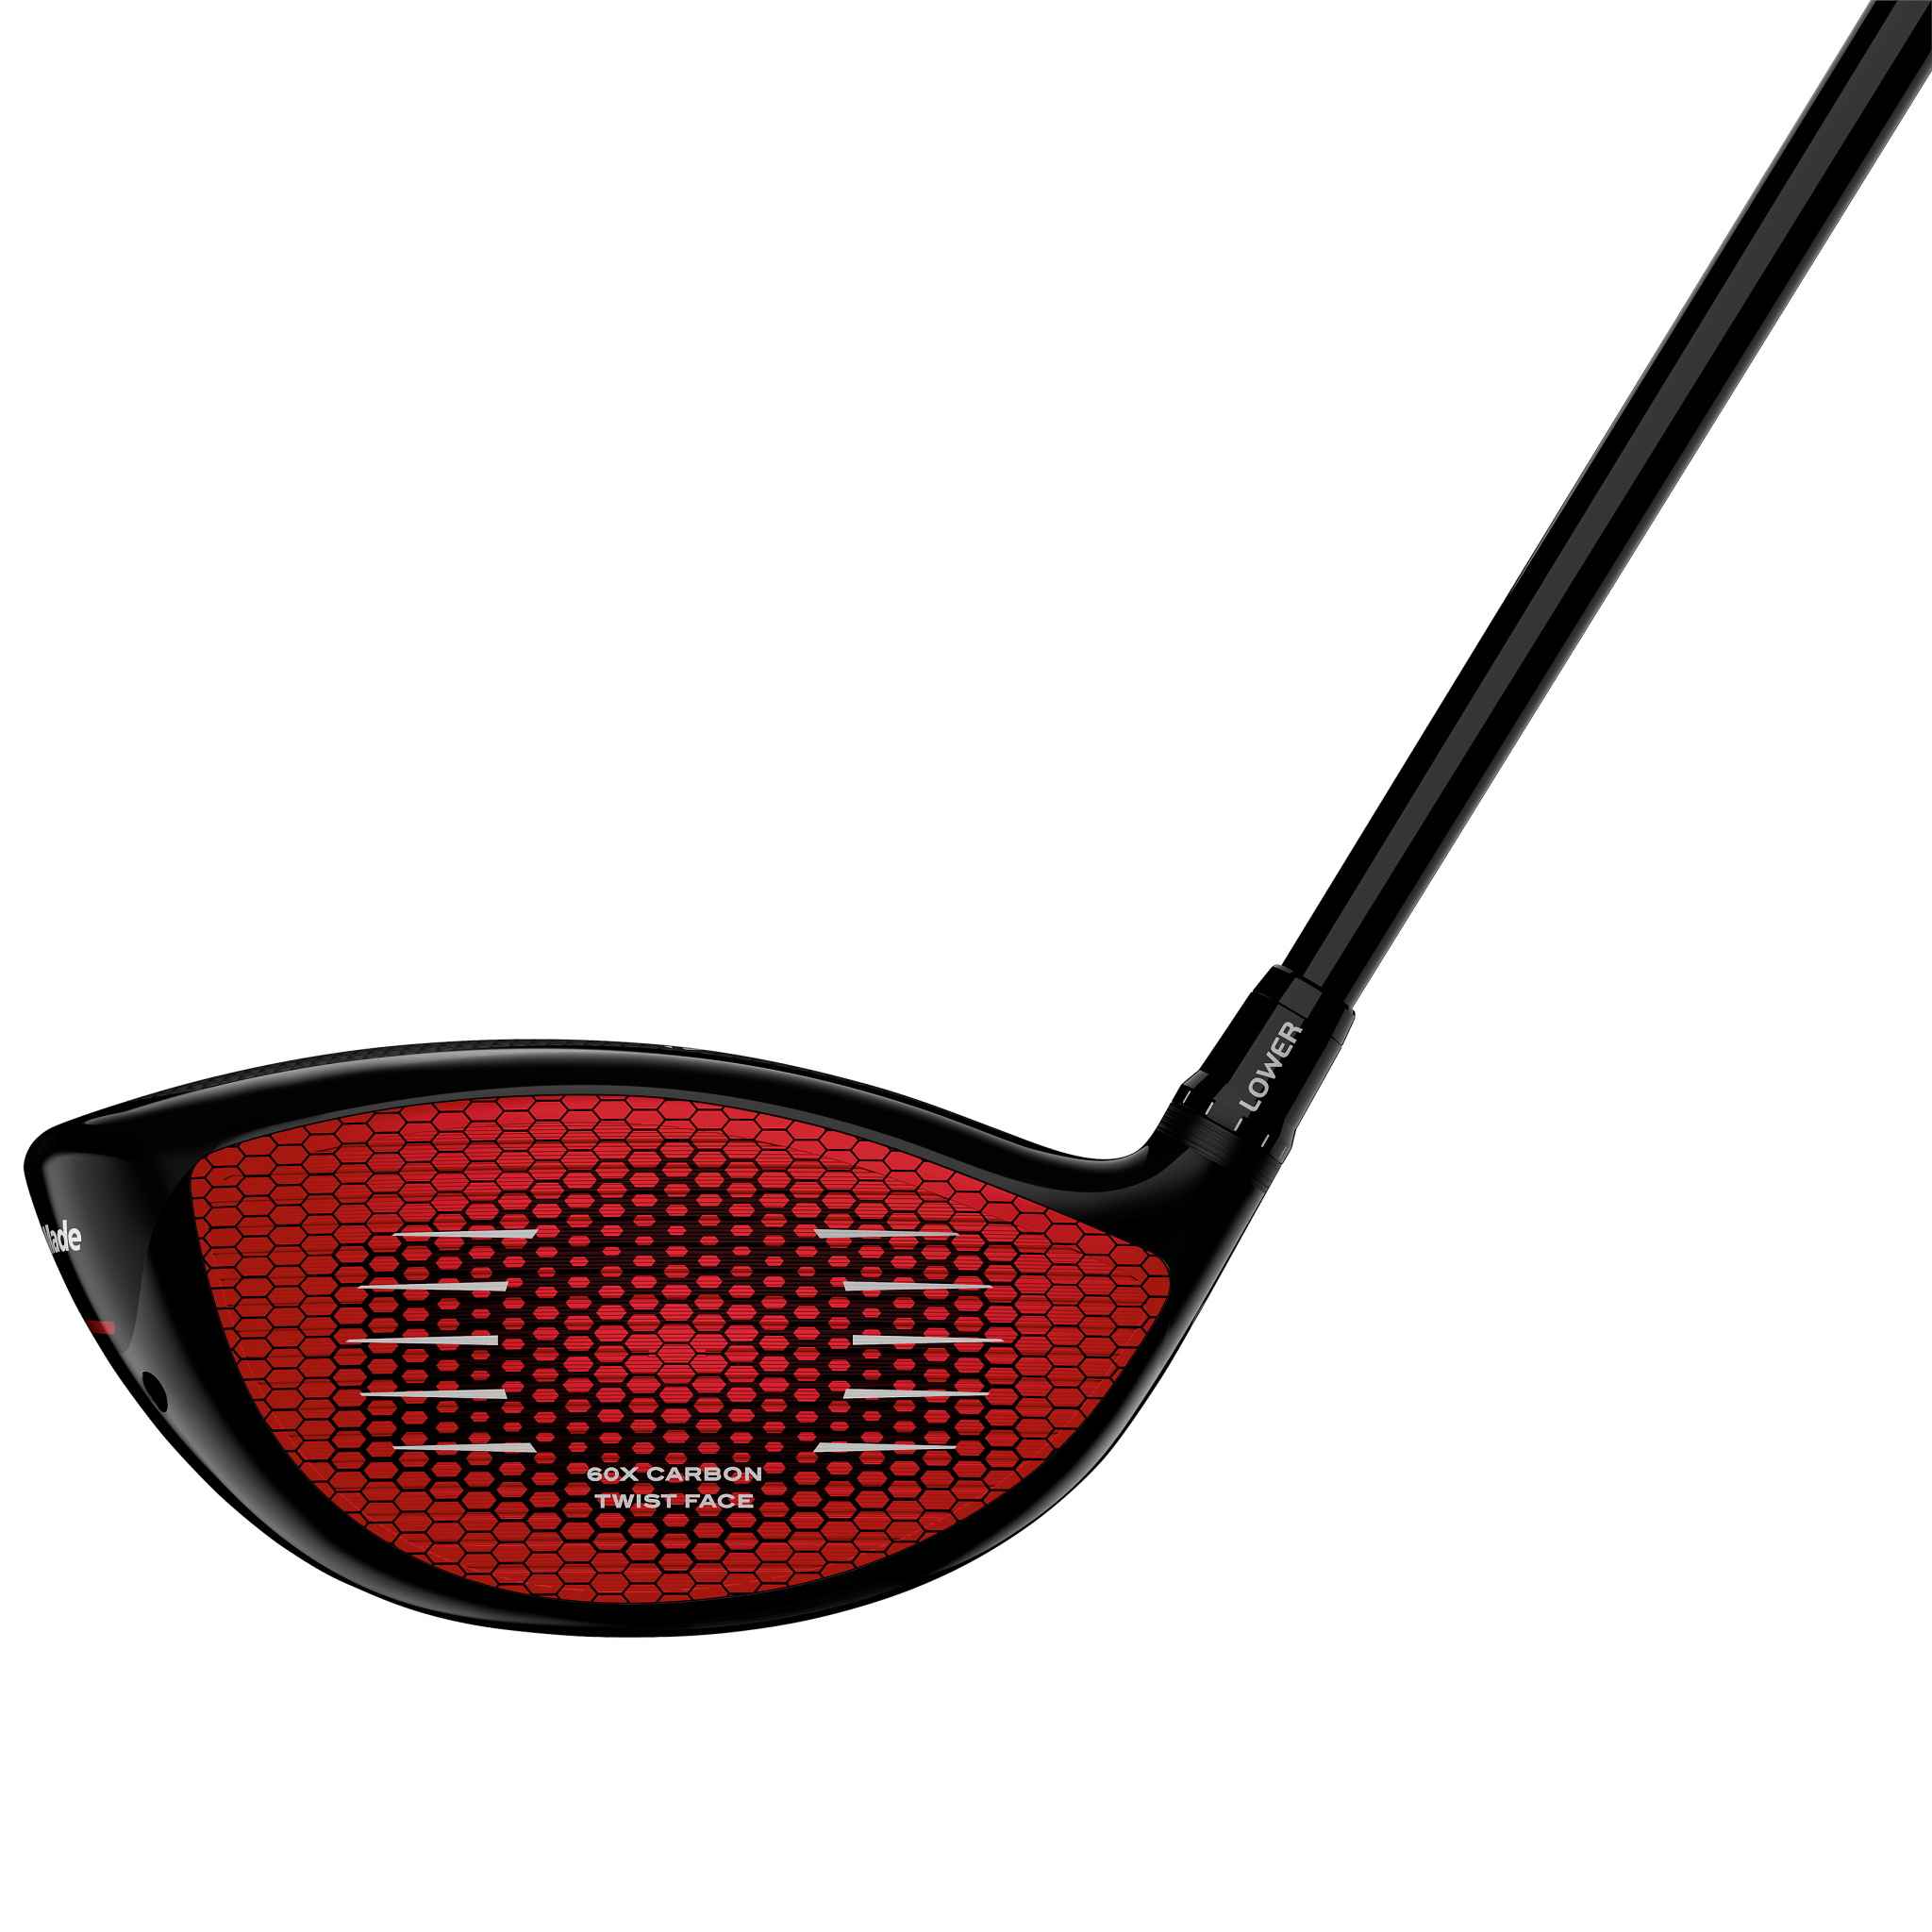 TaylorMade Stealth Plus+ Driver · Right handed · Stiff · 9°